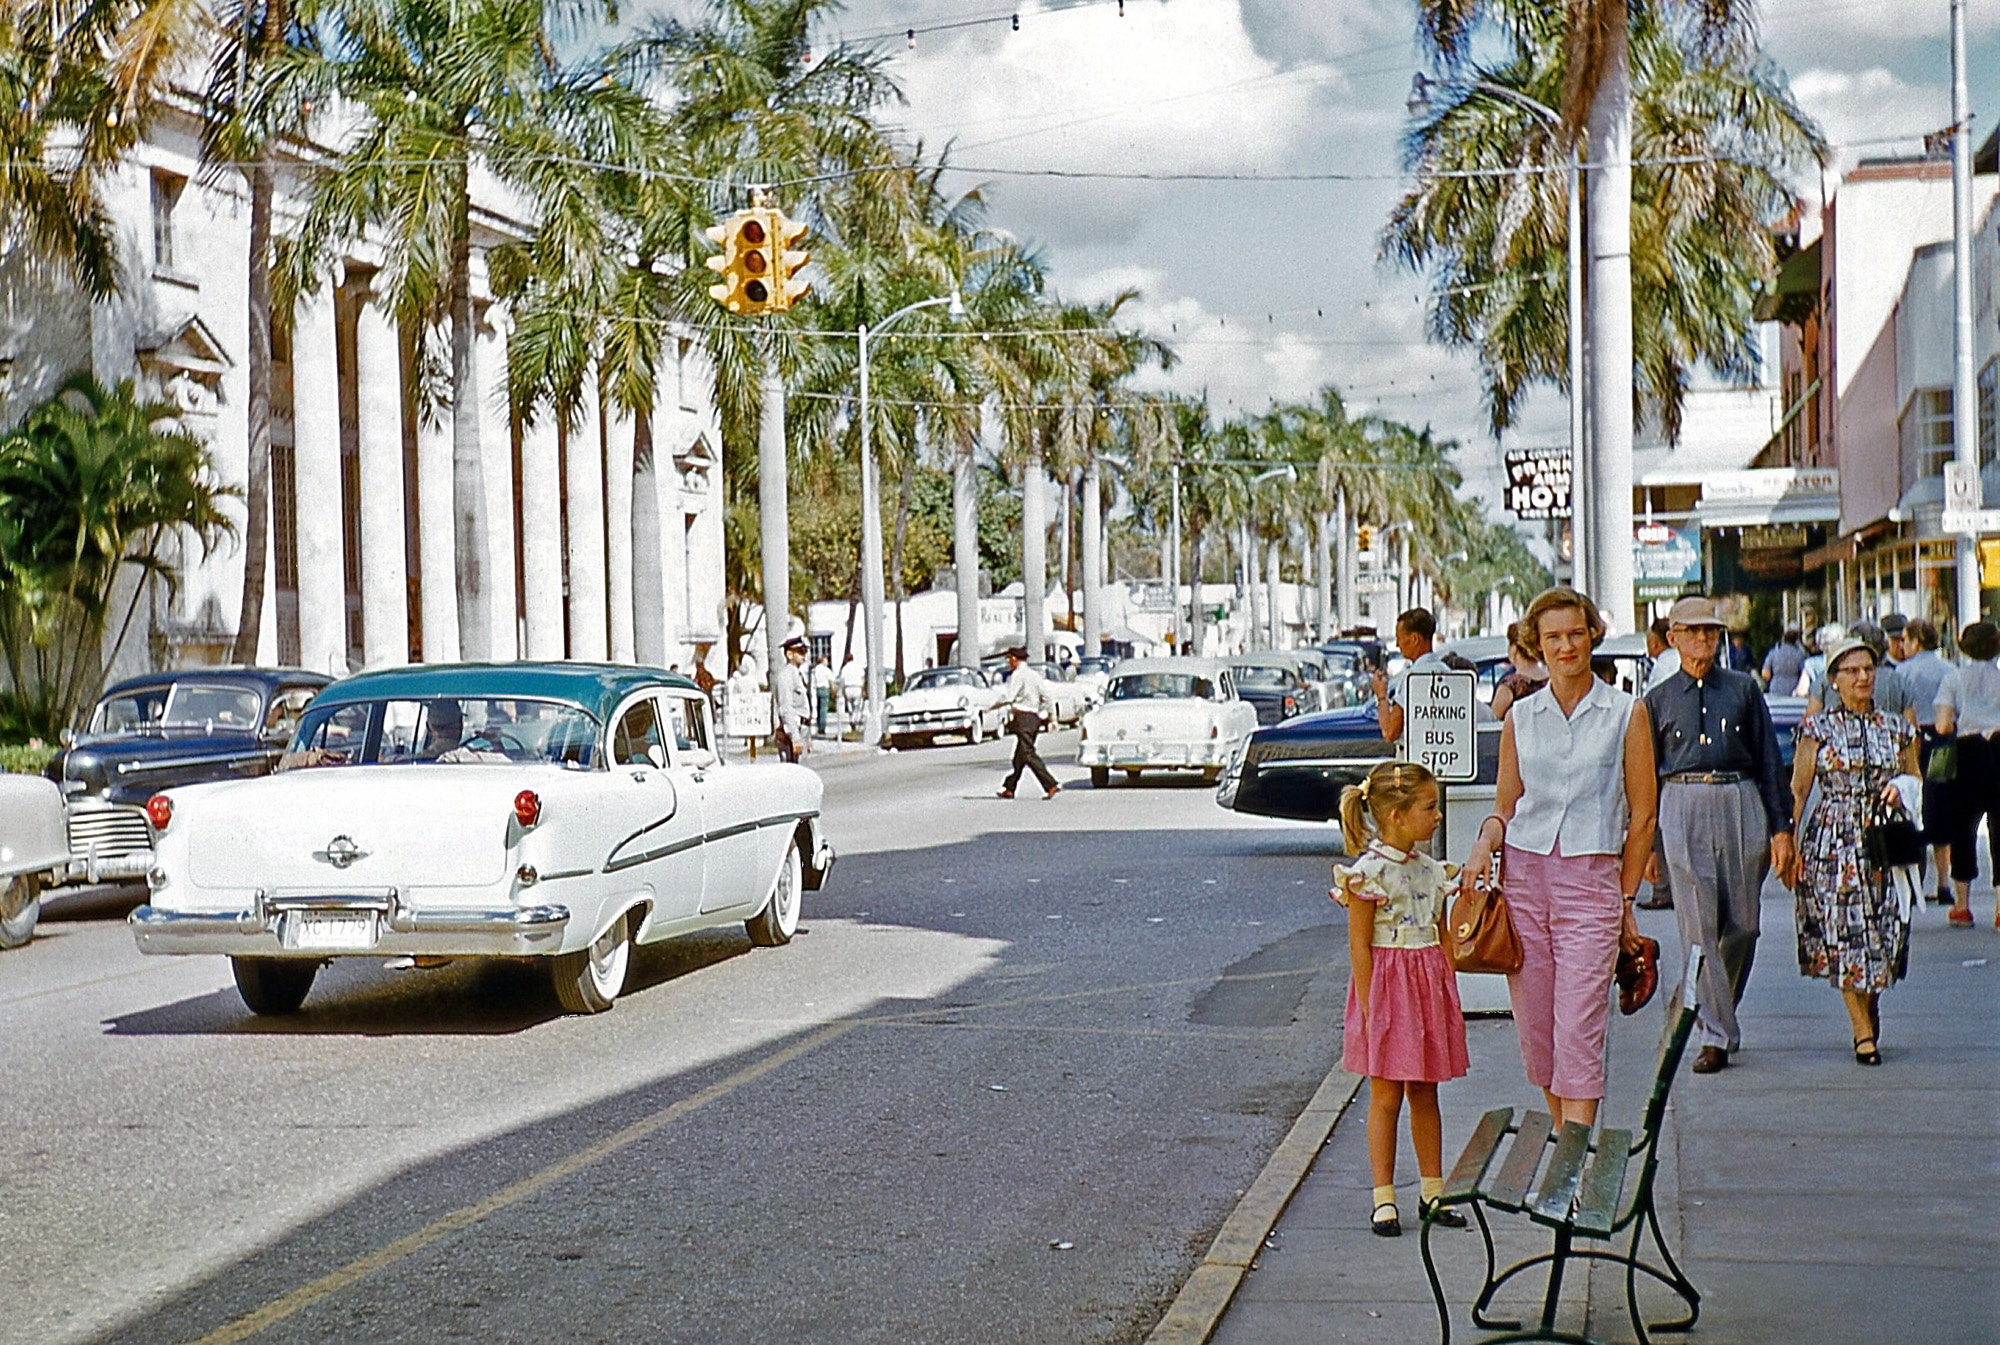 Another in a series of Kodachromes taken by my dad in the late 1950s as he traversed the country with wife and daughter in tow. View full size.